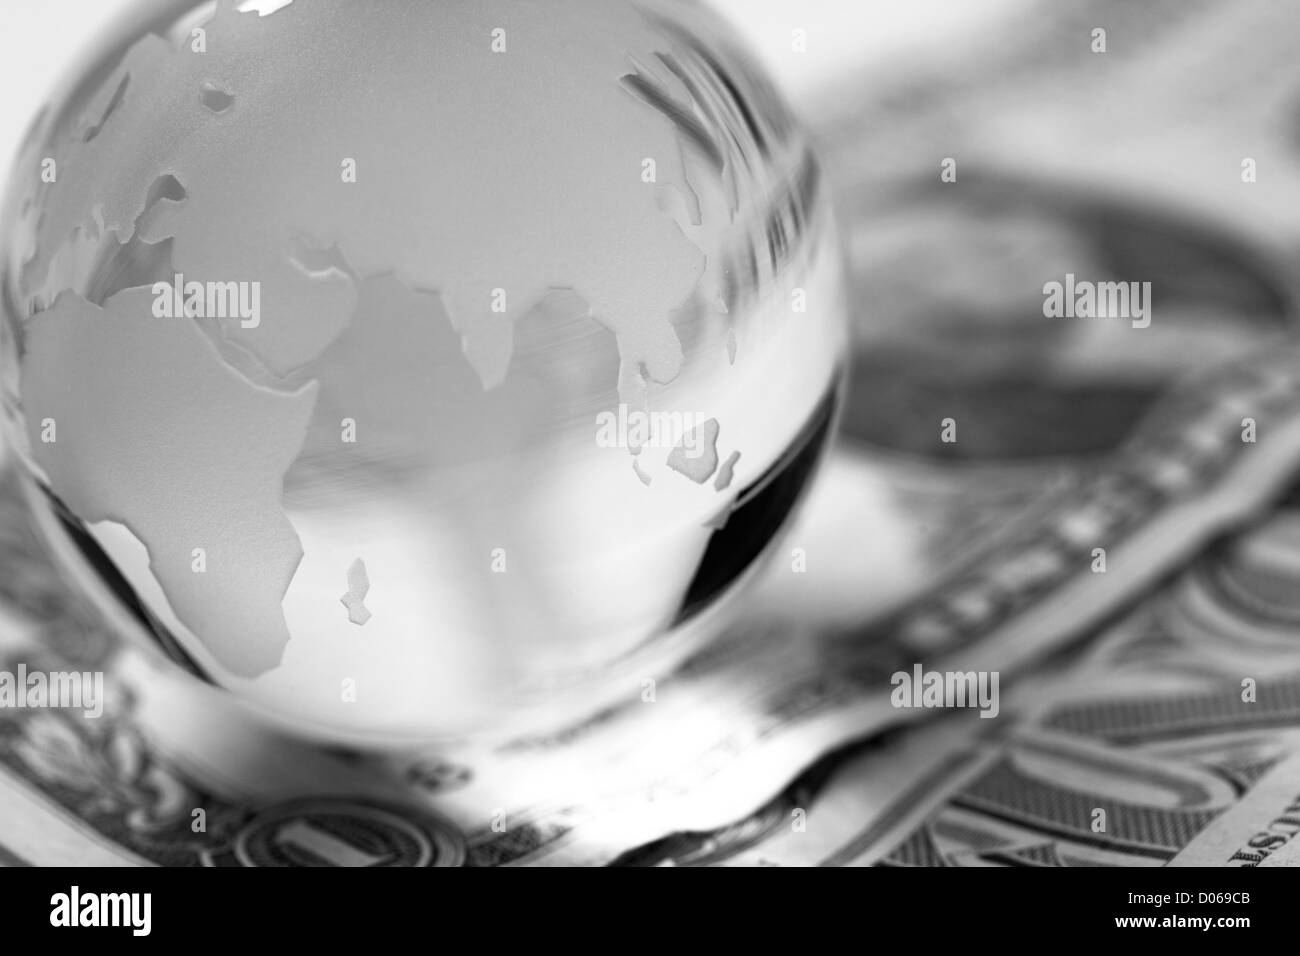 Globe and american dollars. Fine abstract image of financial background Stock Photo